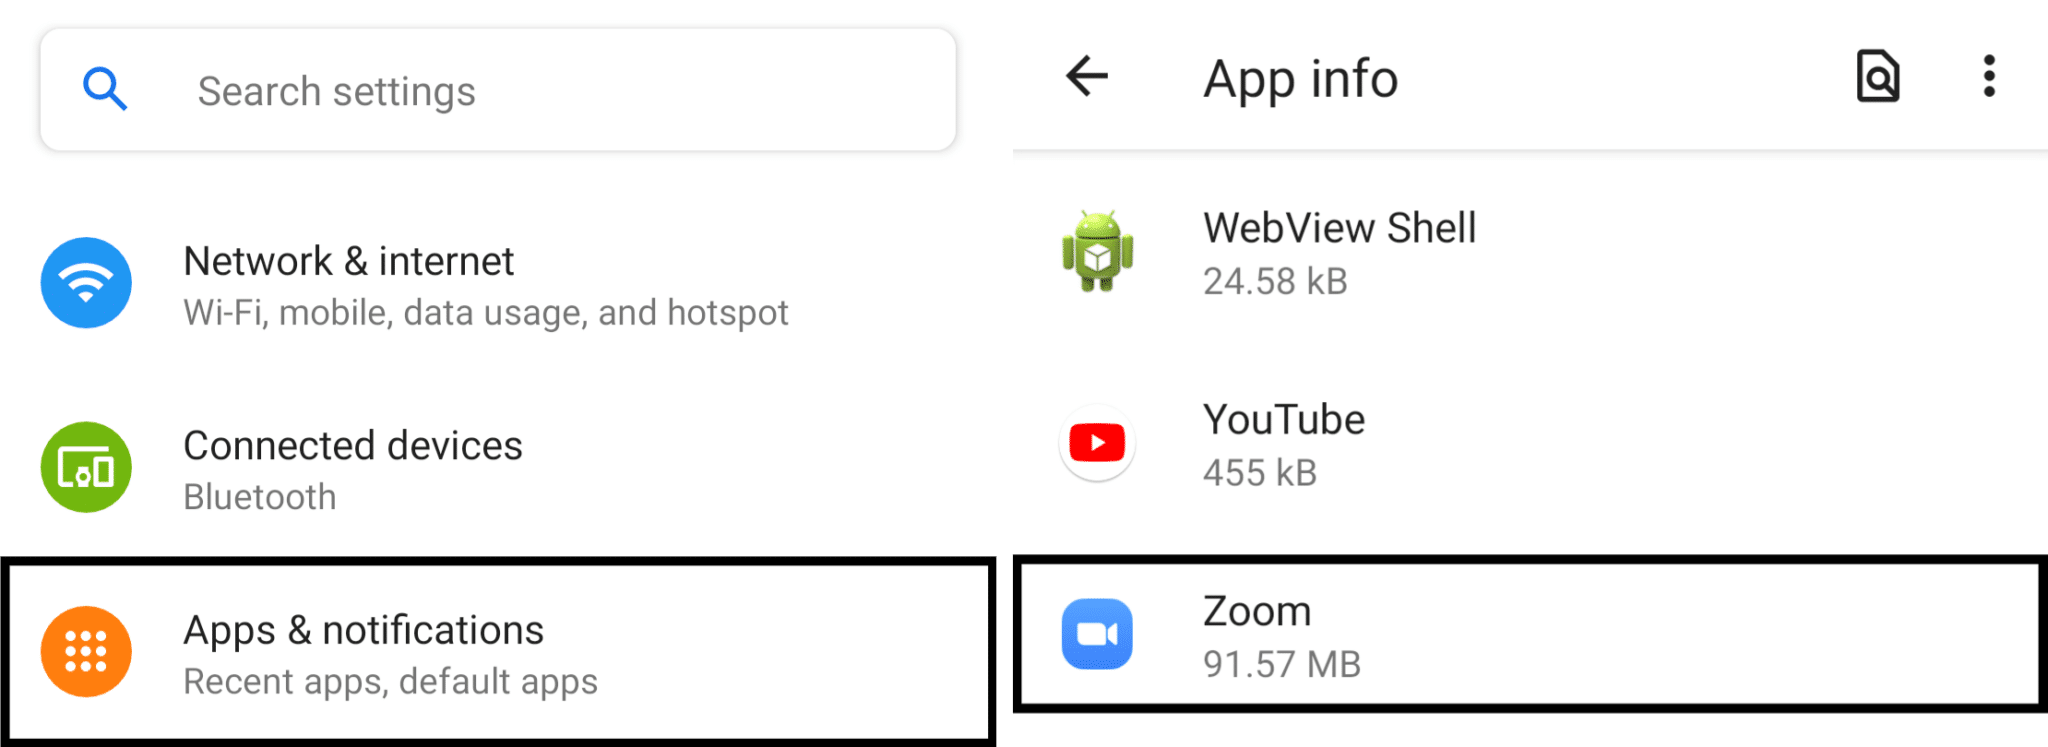 Allow permissions for Zoom on Android to fix zoom screen sharing not working